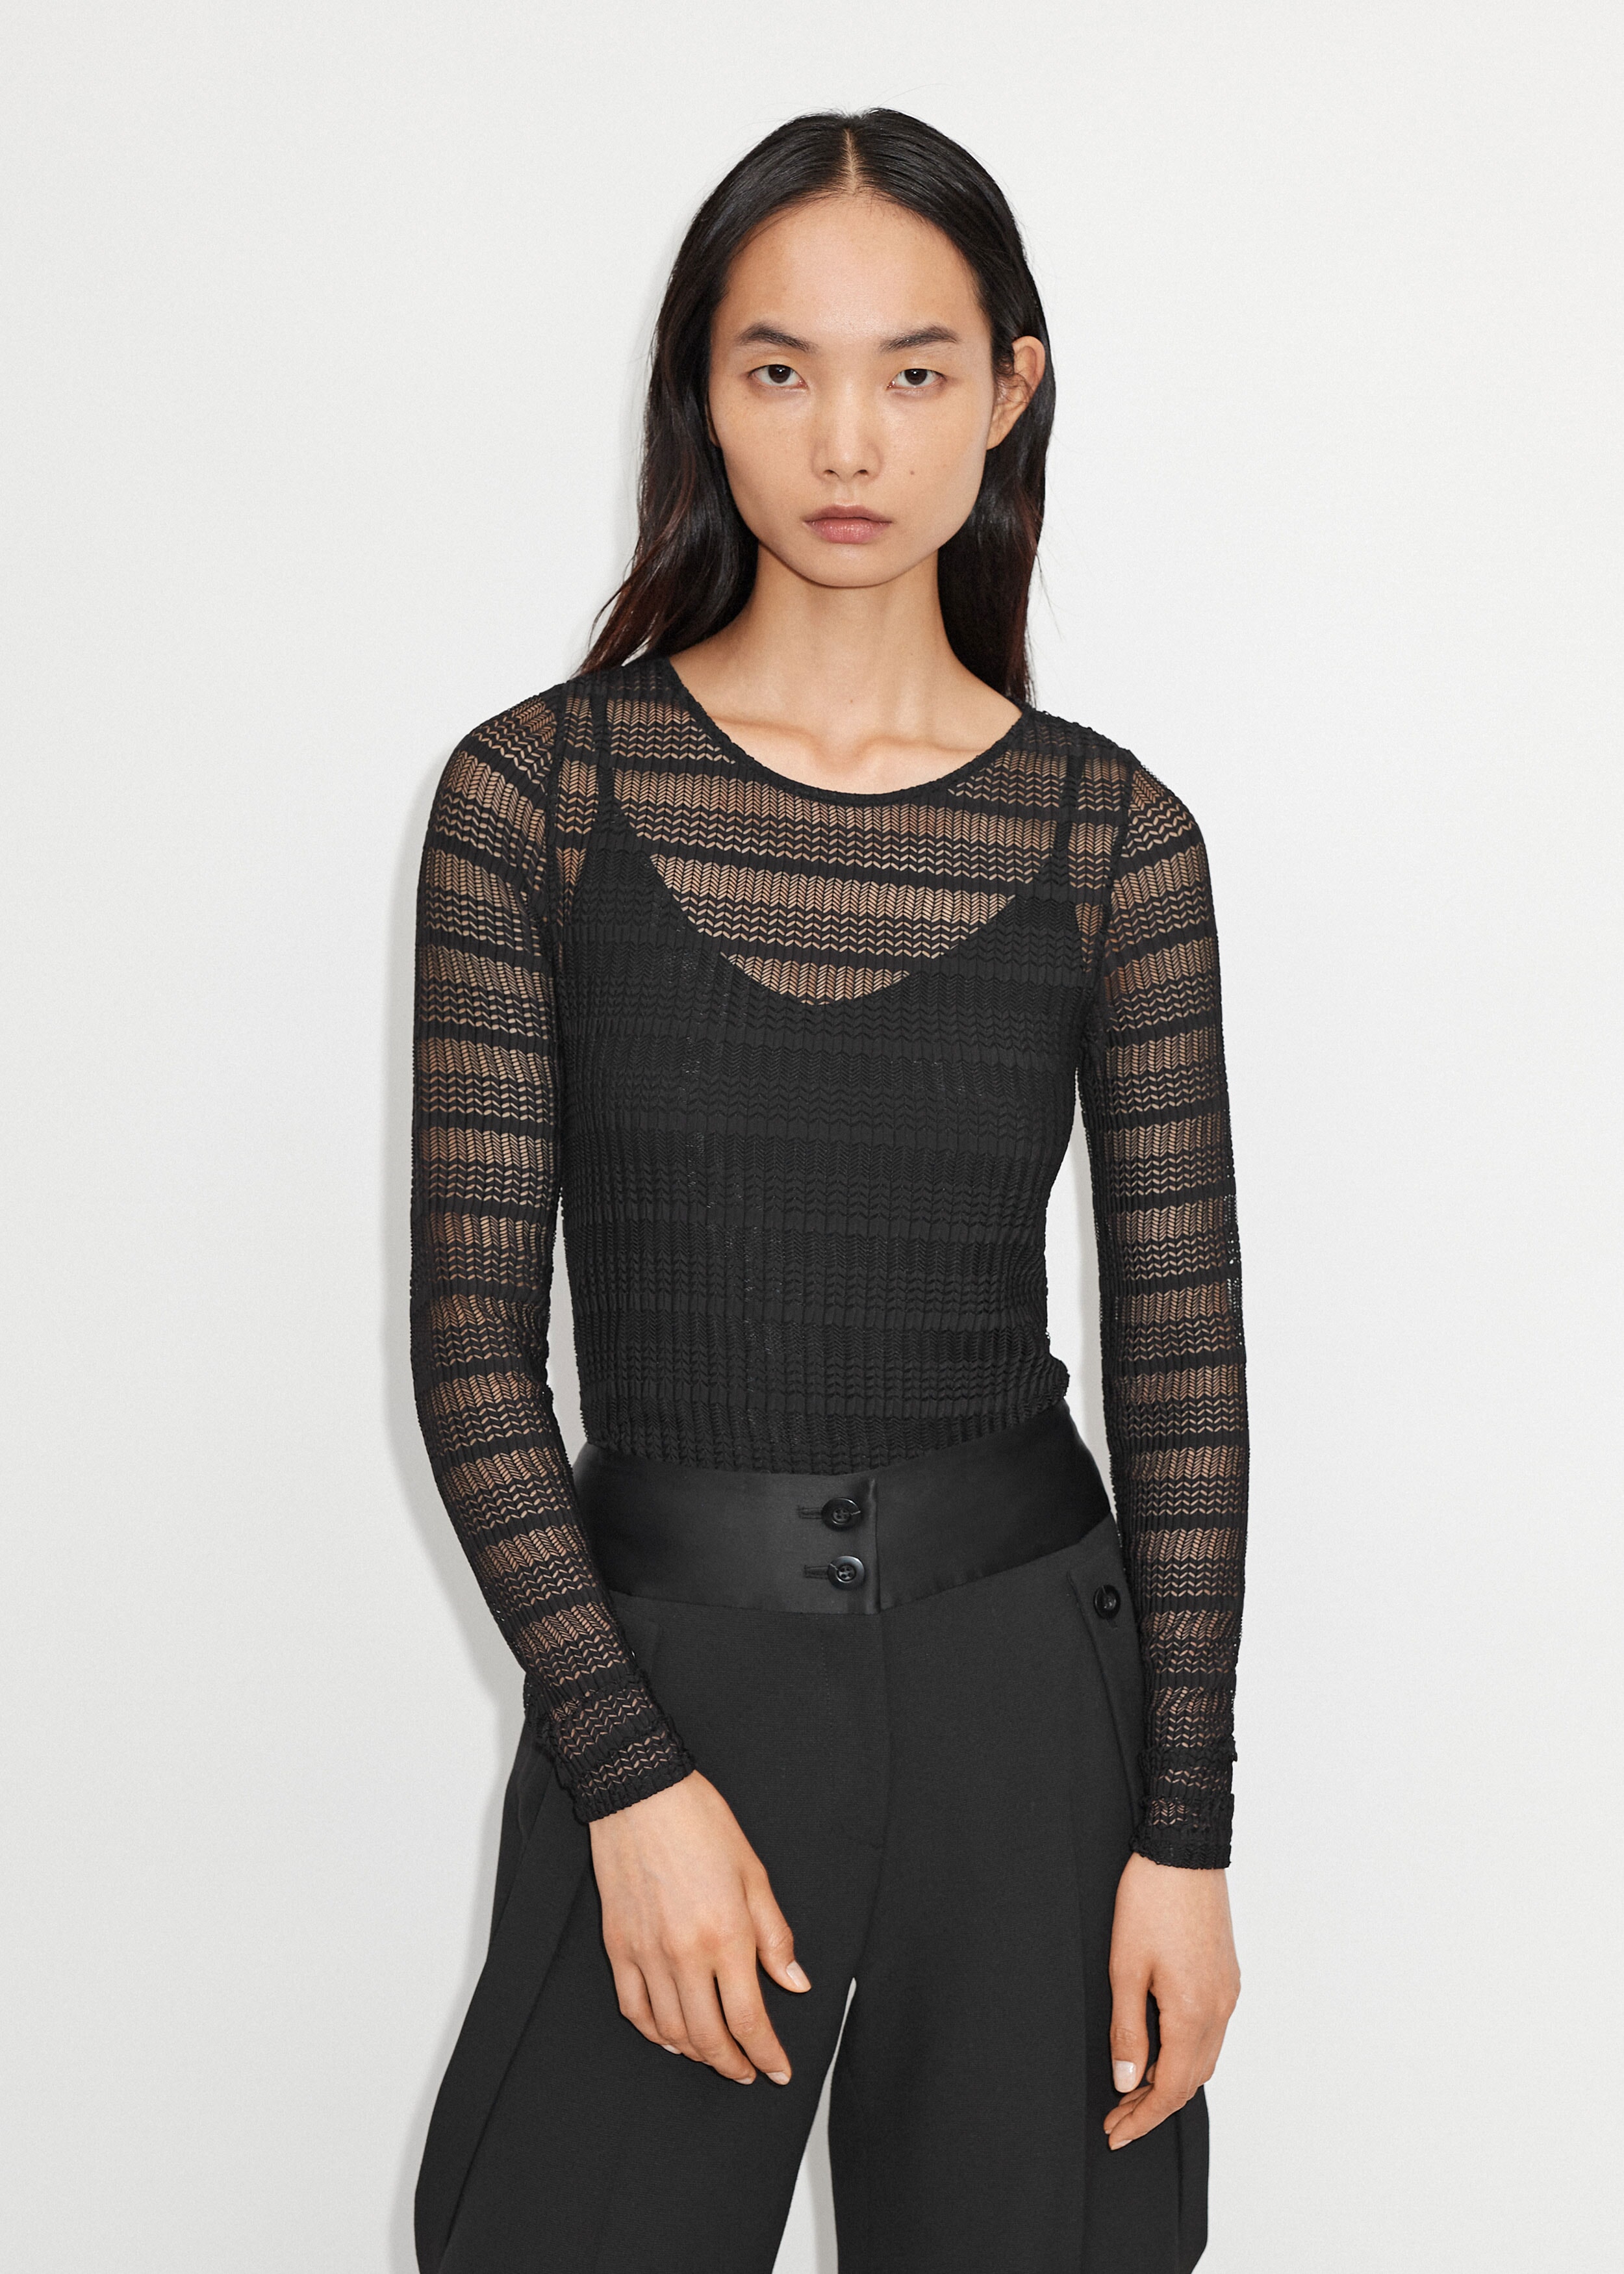 Textured Stretch Lace Body Tight Black